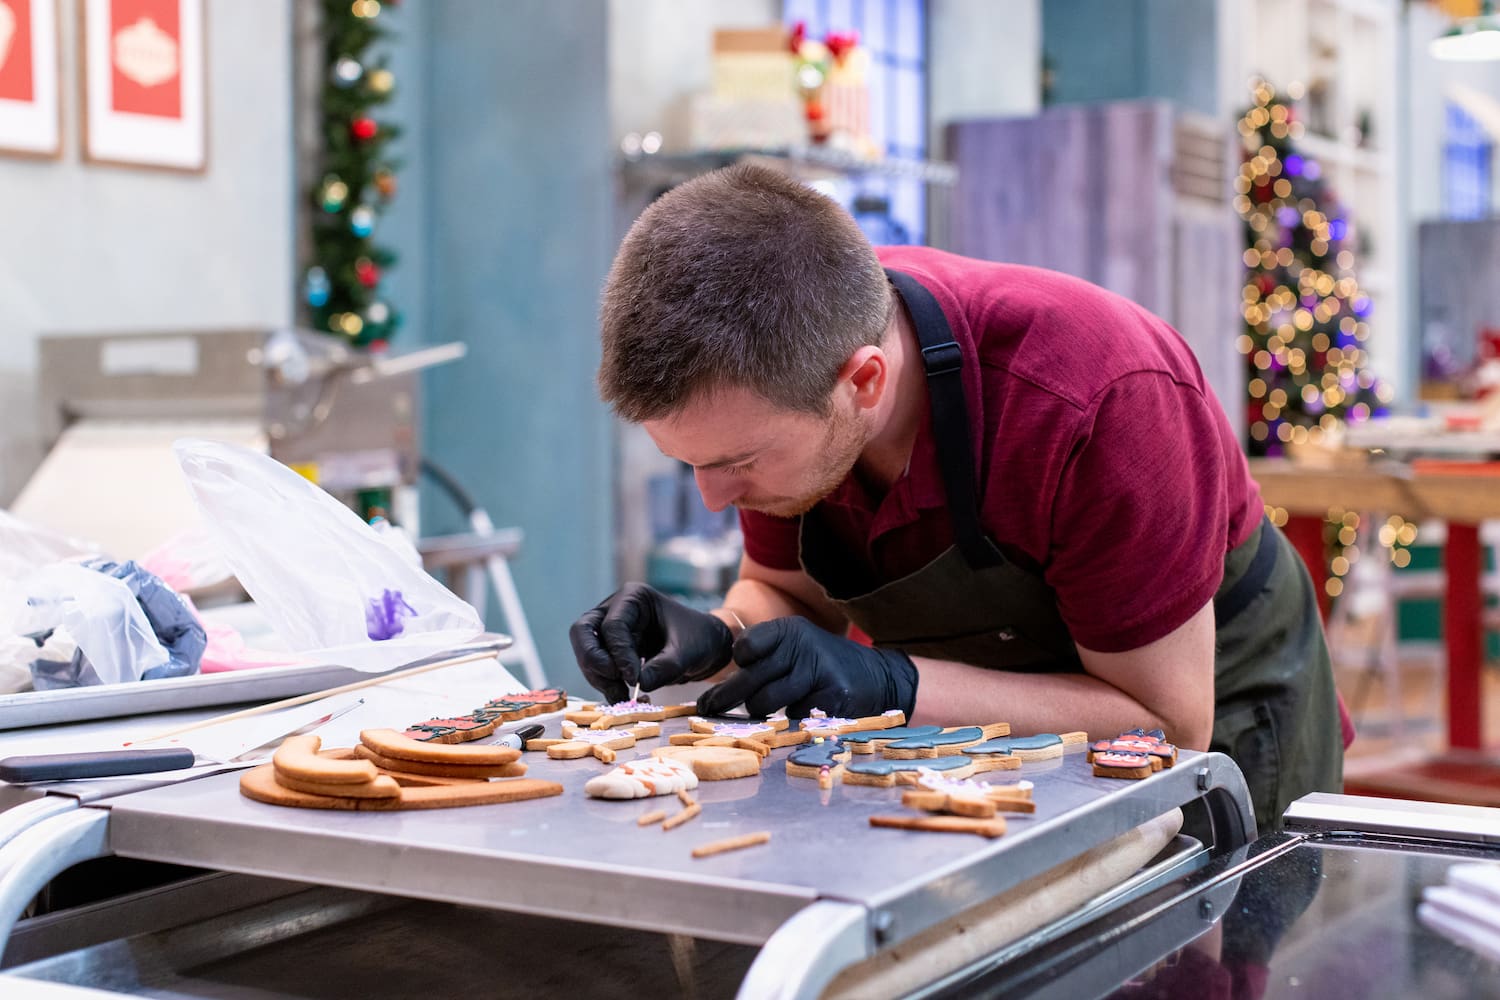 Featured image for “Del. man vies for $10,000 on Food Network gingerbread show”